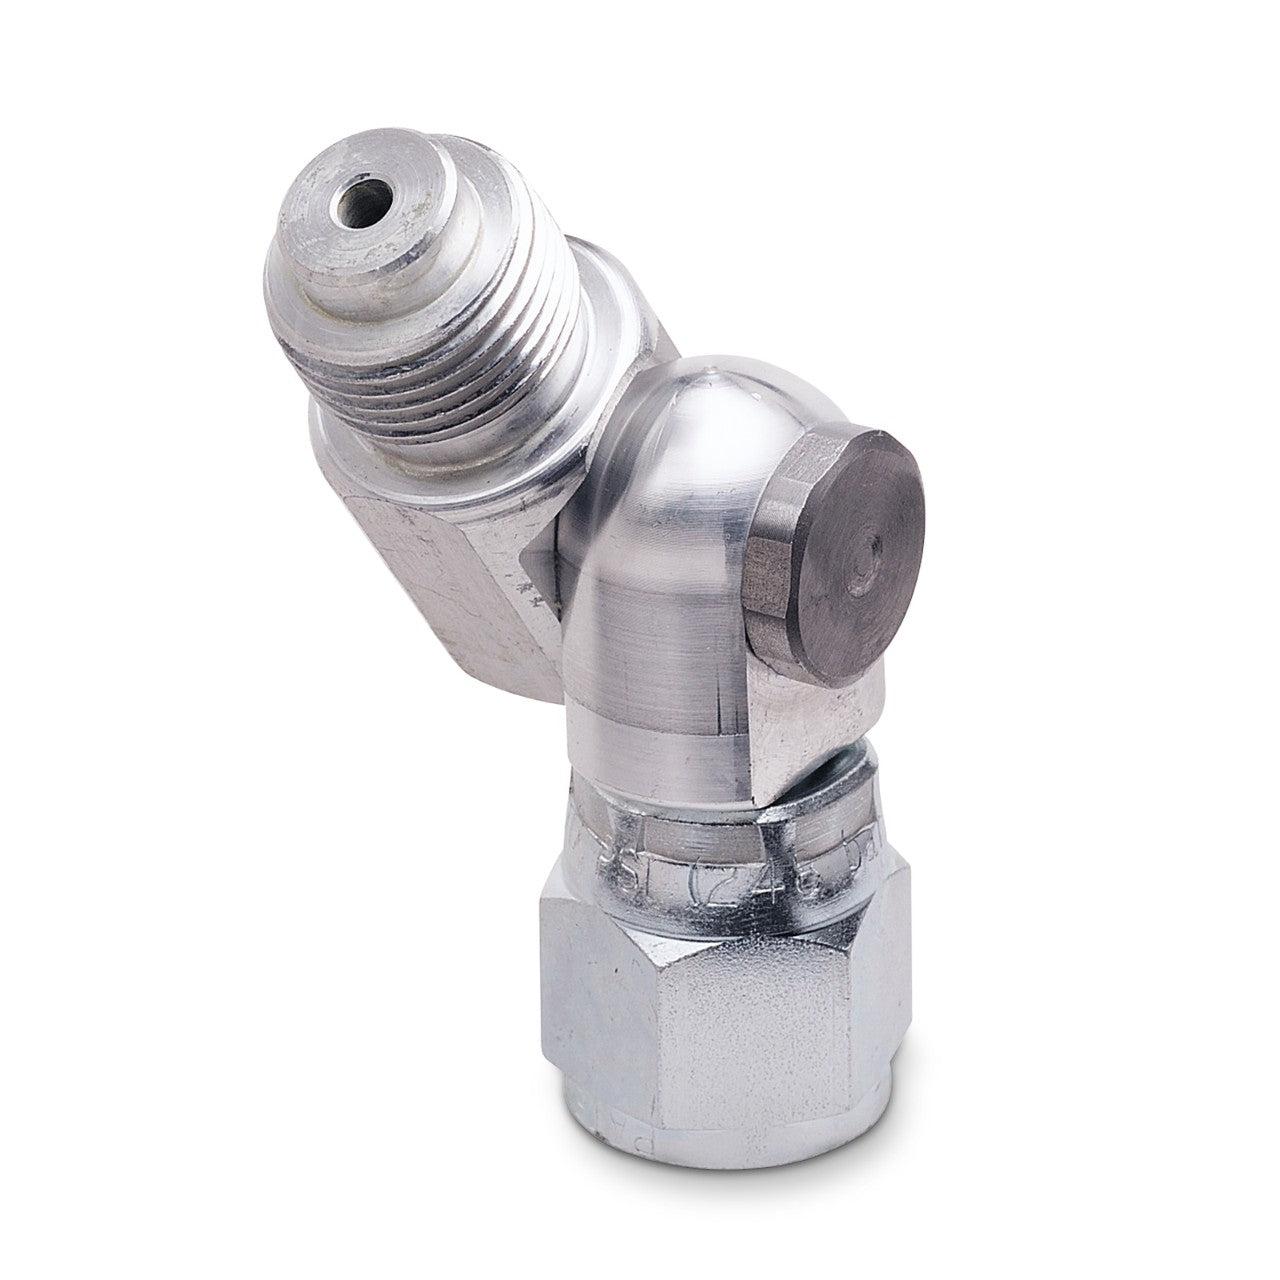 180 Degree Easy Turn Directional Spray Adapter